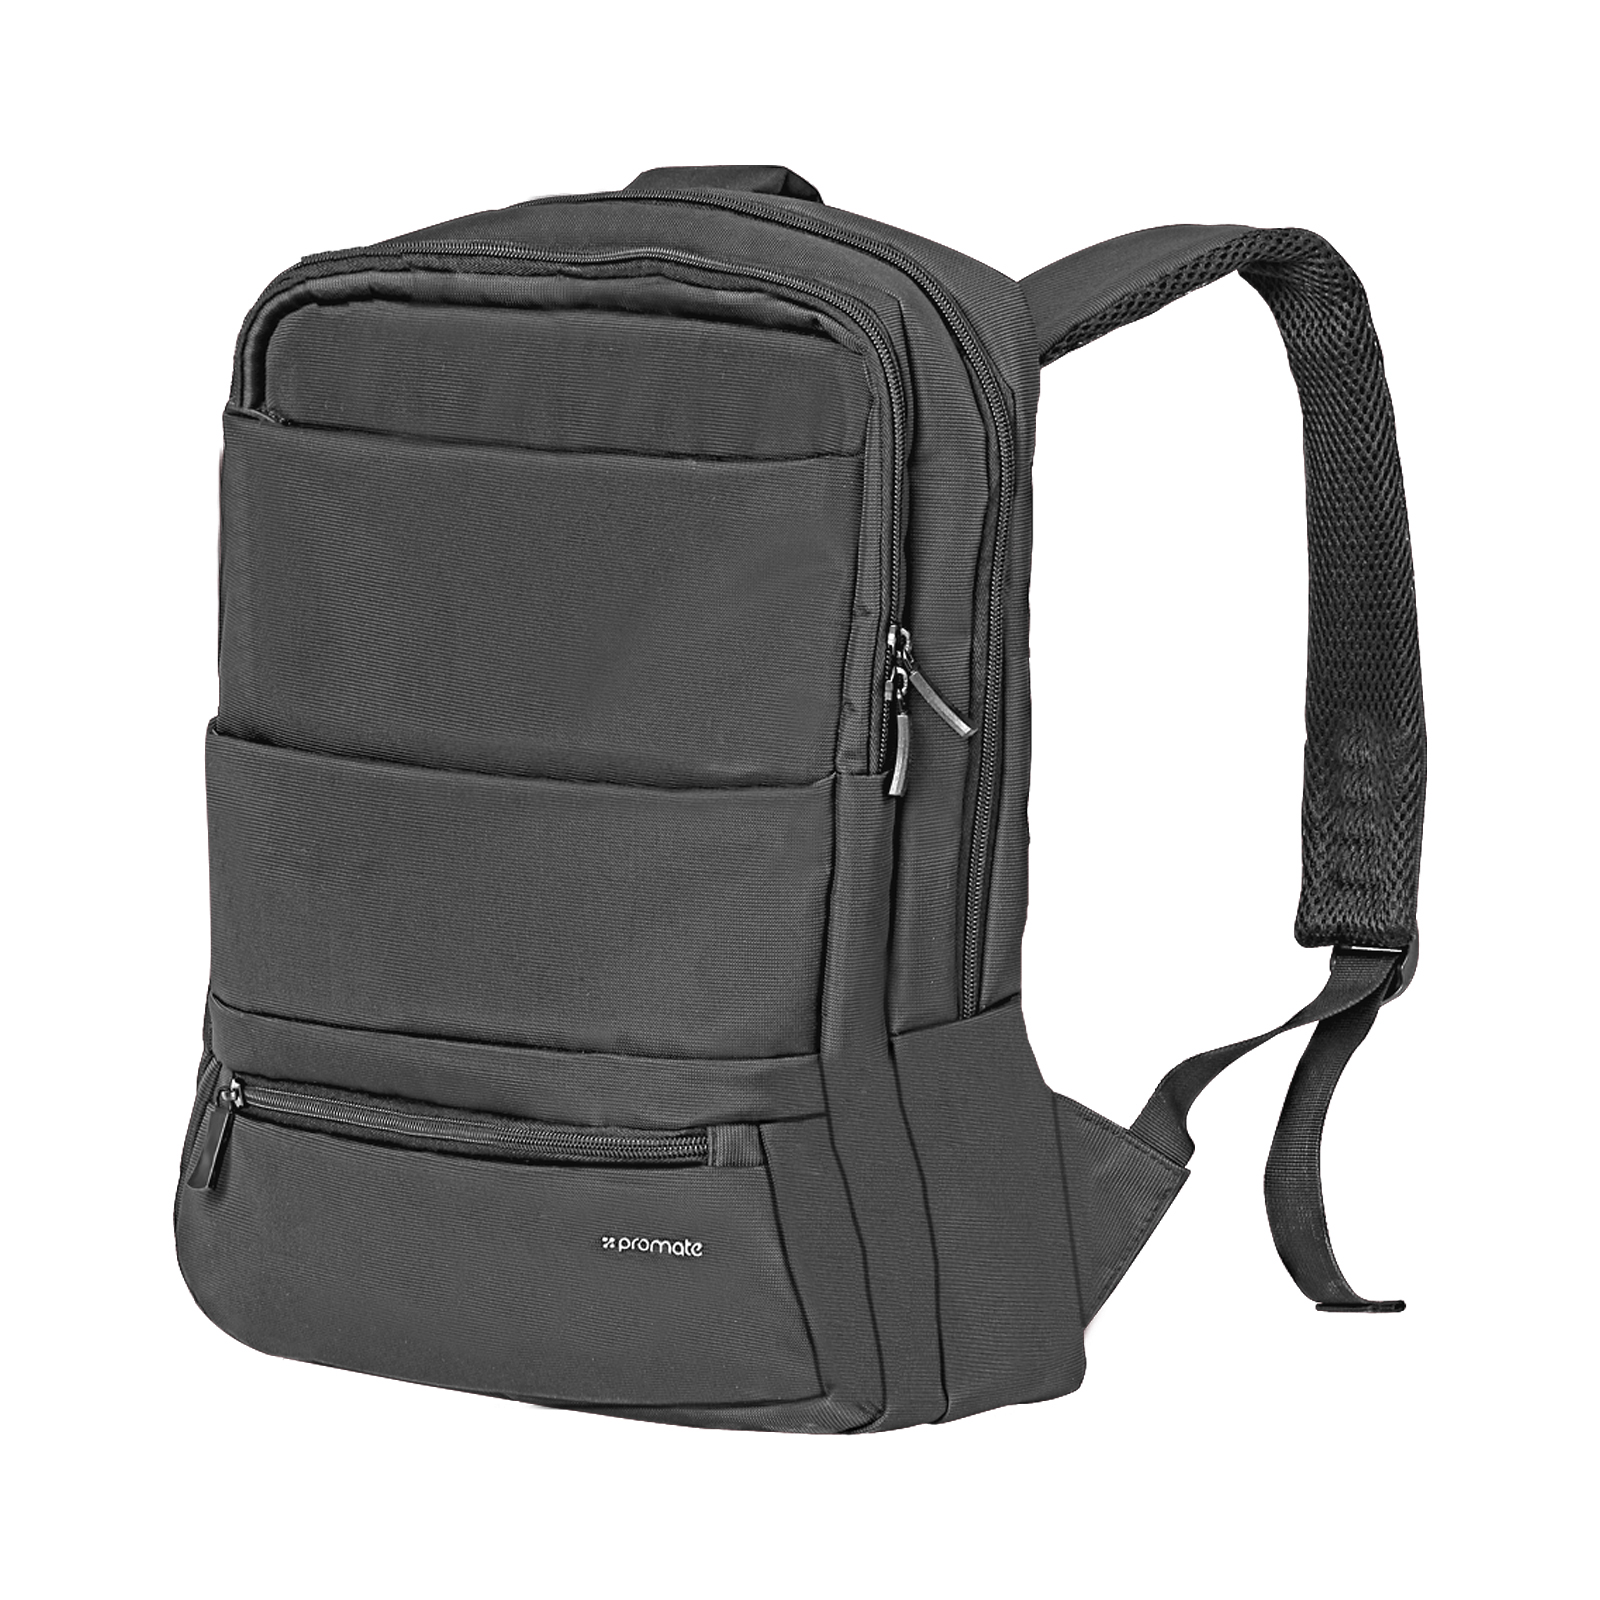 Apollo-BP Dual Pockets Urban Backpack with Multiple Compartments ( BLACK )